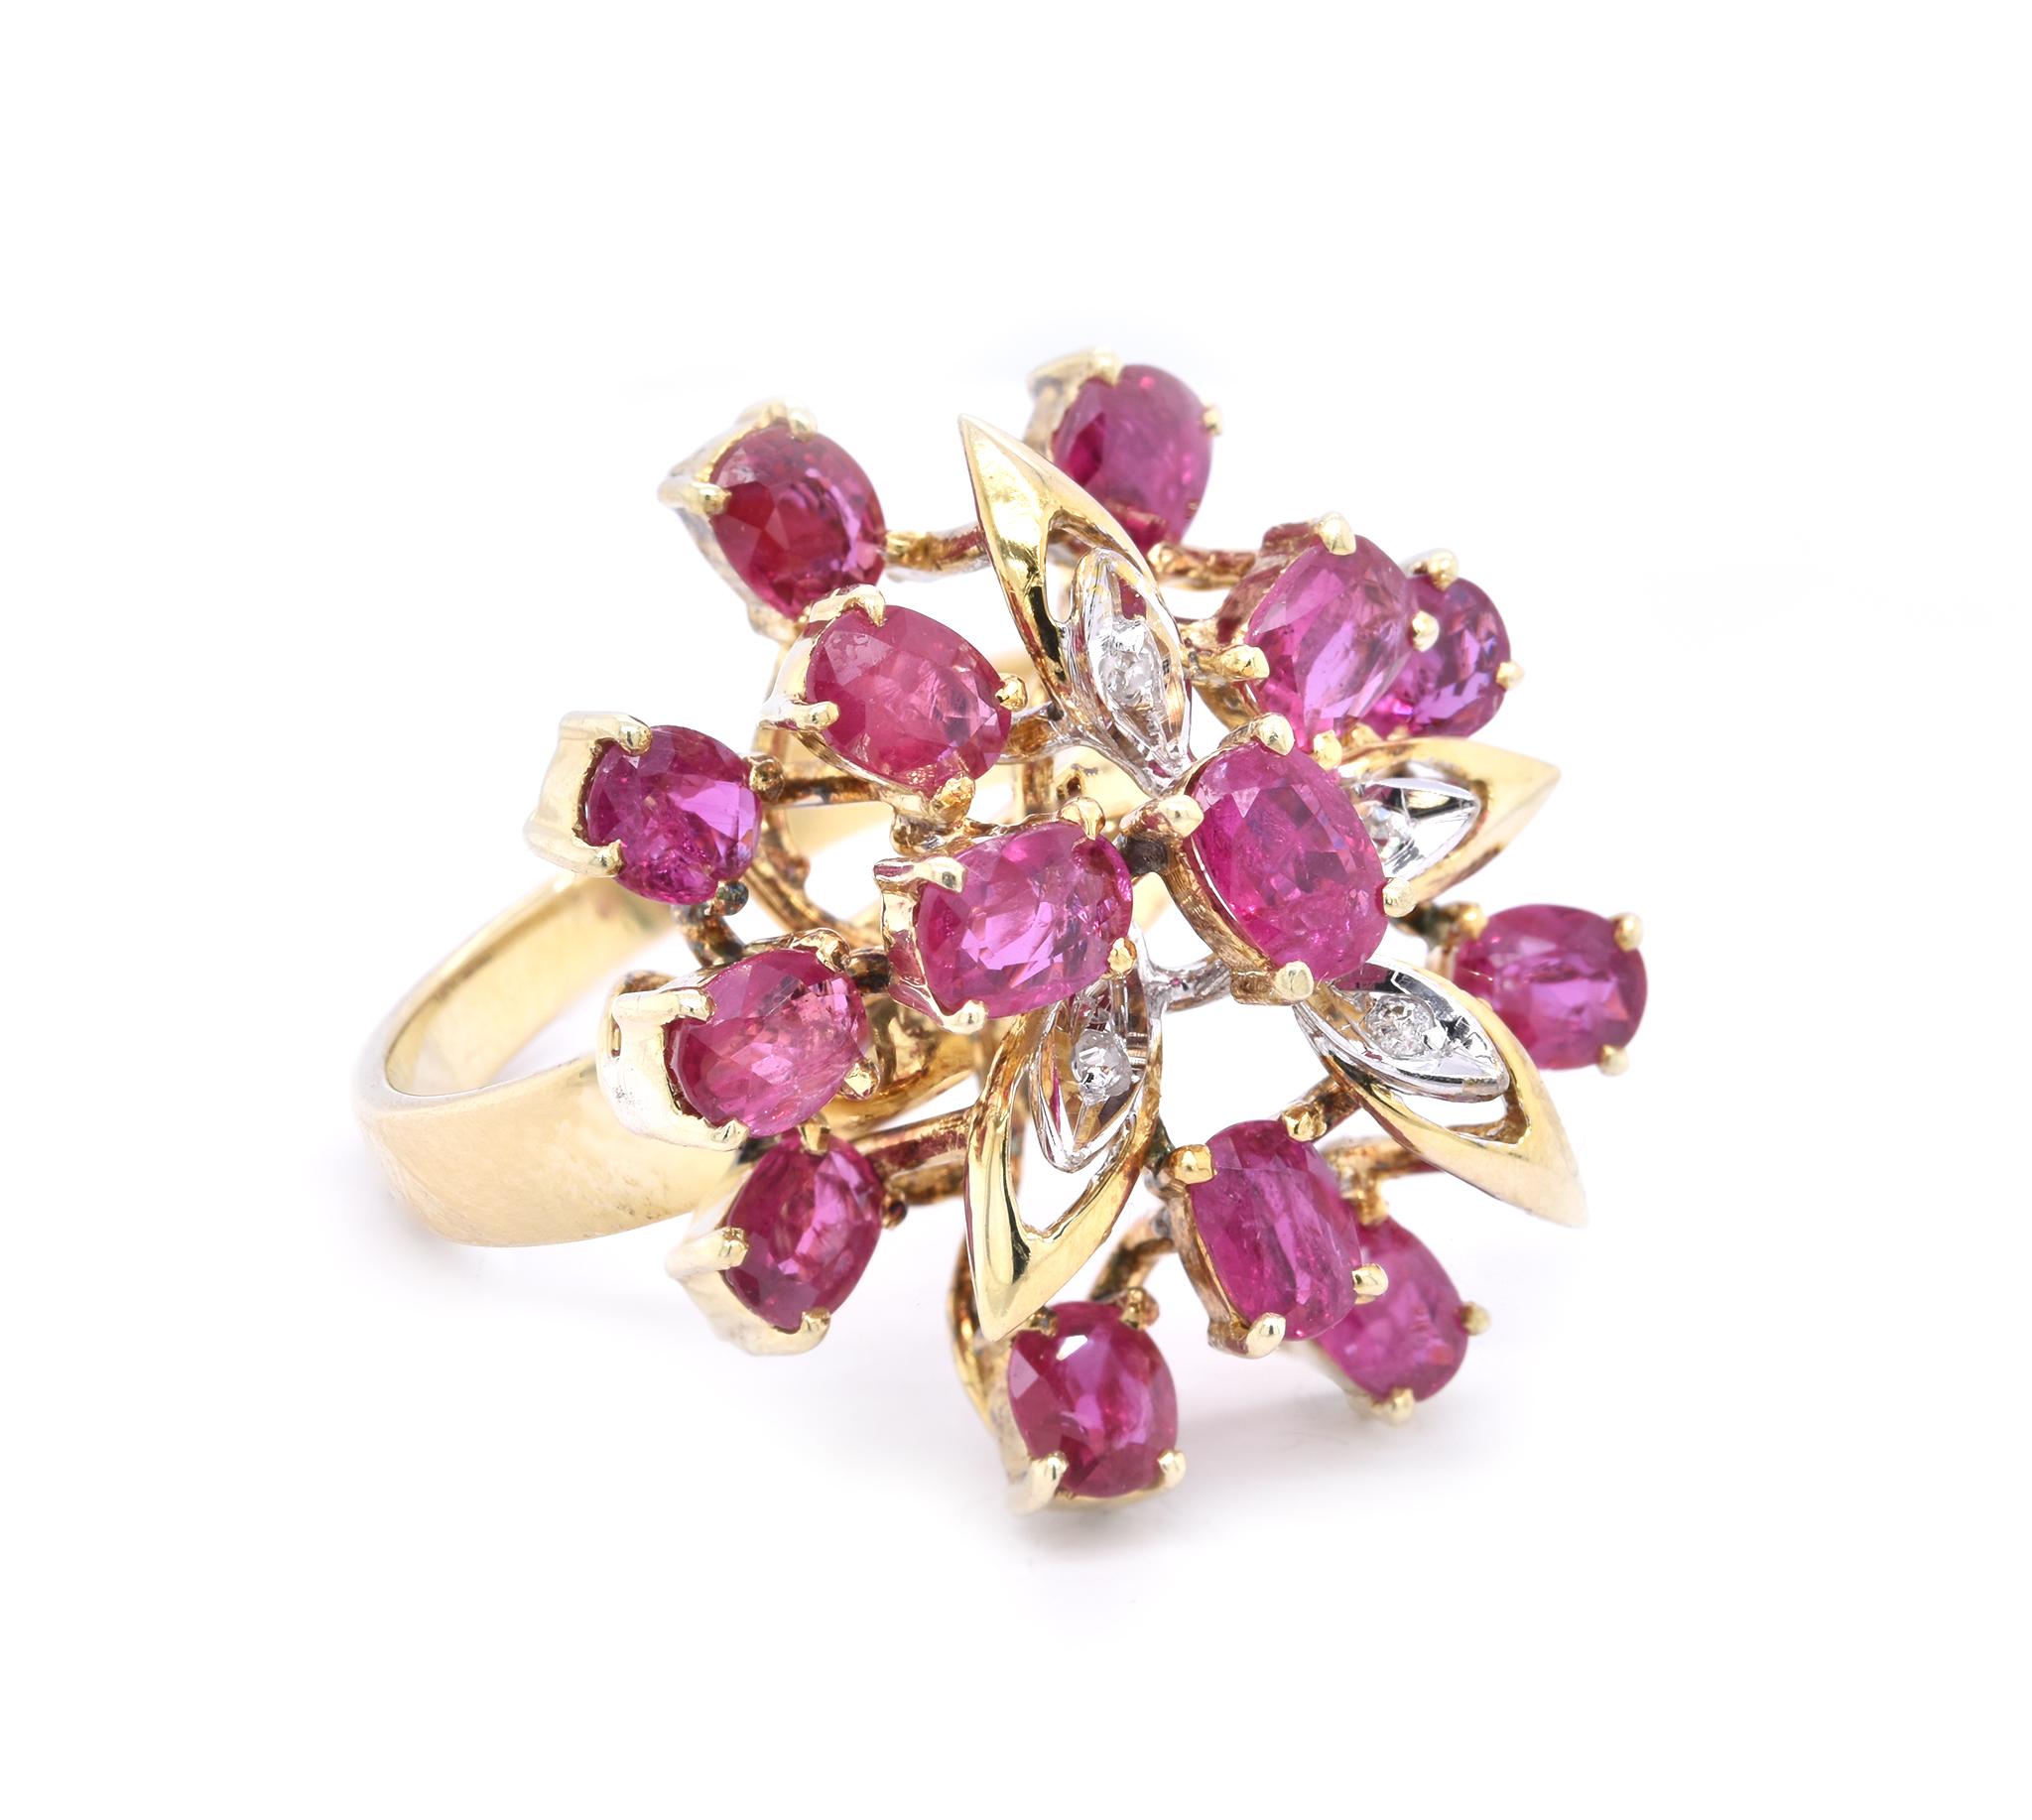 Designer: custom
Material: 14K yellow gold
Diamond: 4 round brilliant cut = .04cttw
Color: H 
Clarity: SI1
Ruby: 15 oval cut = 3.75cttw
Ring Size: 6.75 (please allow up to 2 additional business days for sizing requests)
Dimensions: ring top measures